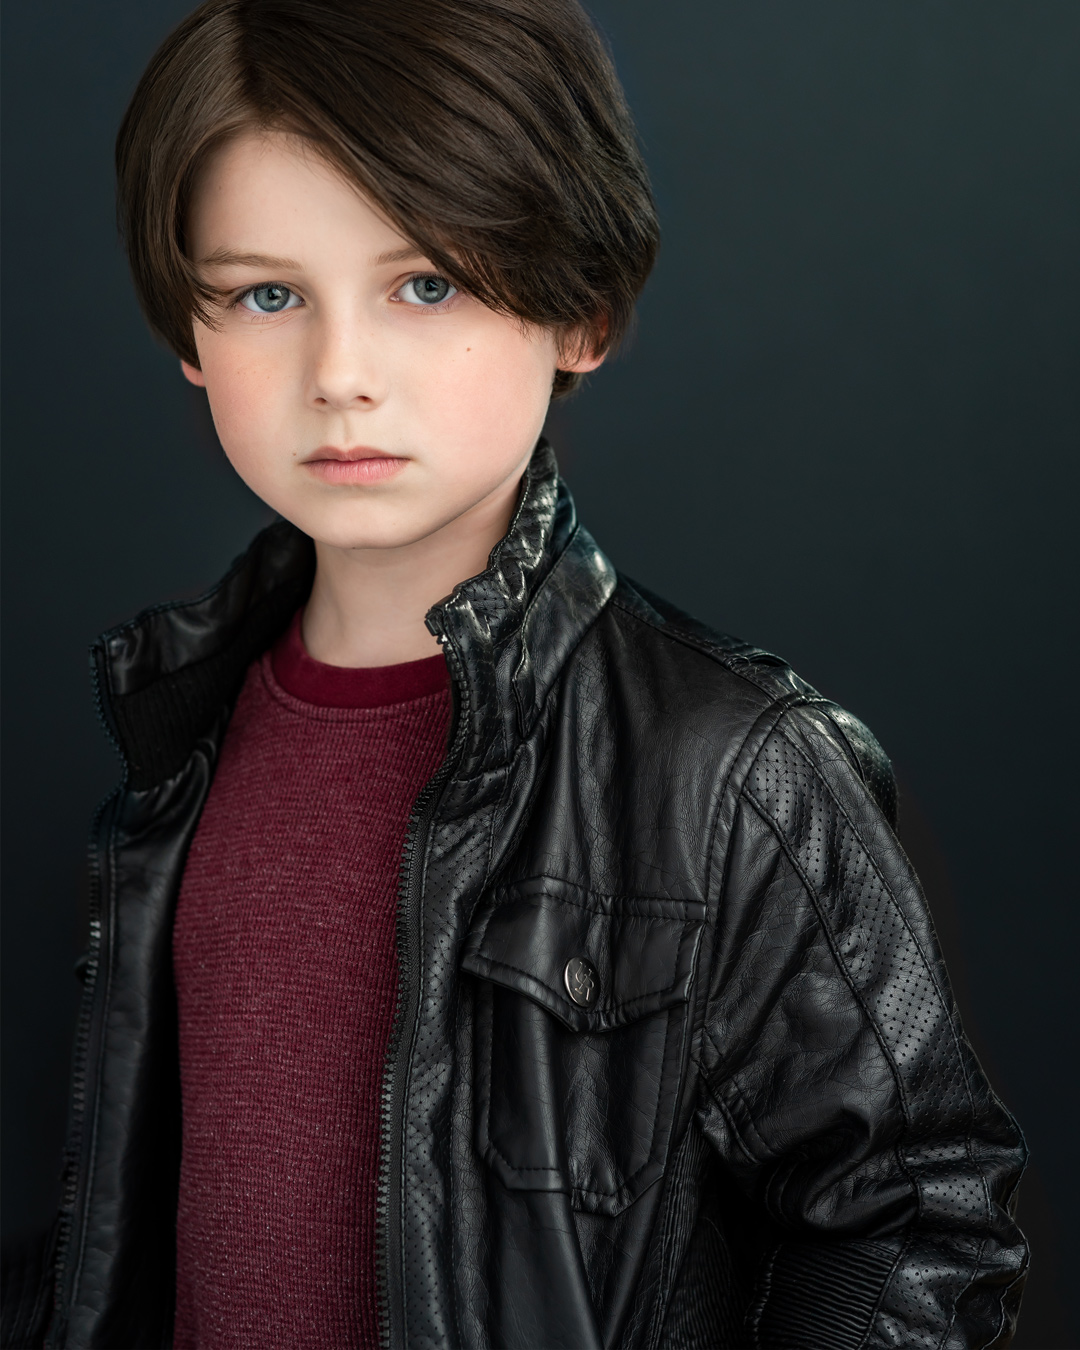 Riverdale's Dagwood Cooper Tough kid headshot of actor wearing a leather jacket